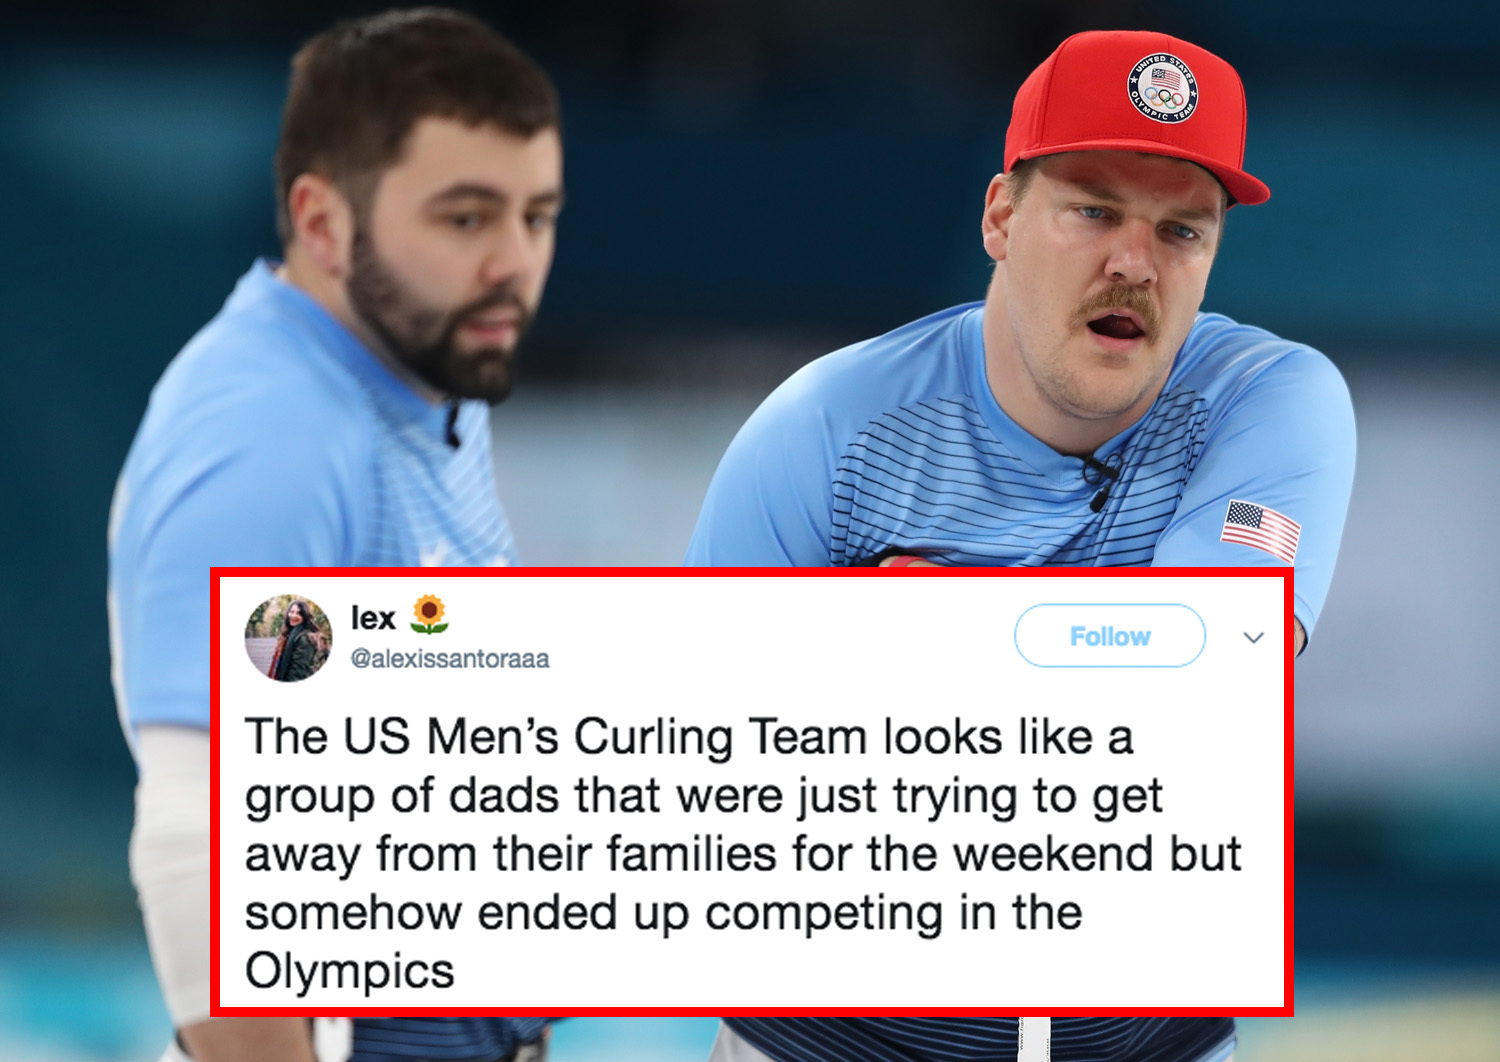 The US Mens Curling Team Is Just A Bunch Of Dads Who Somehow Won A Gold Medal